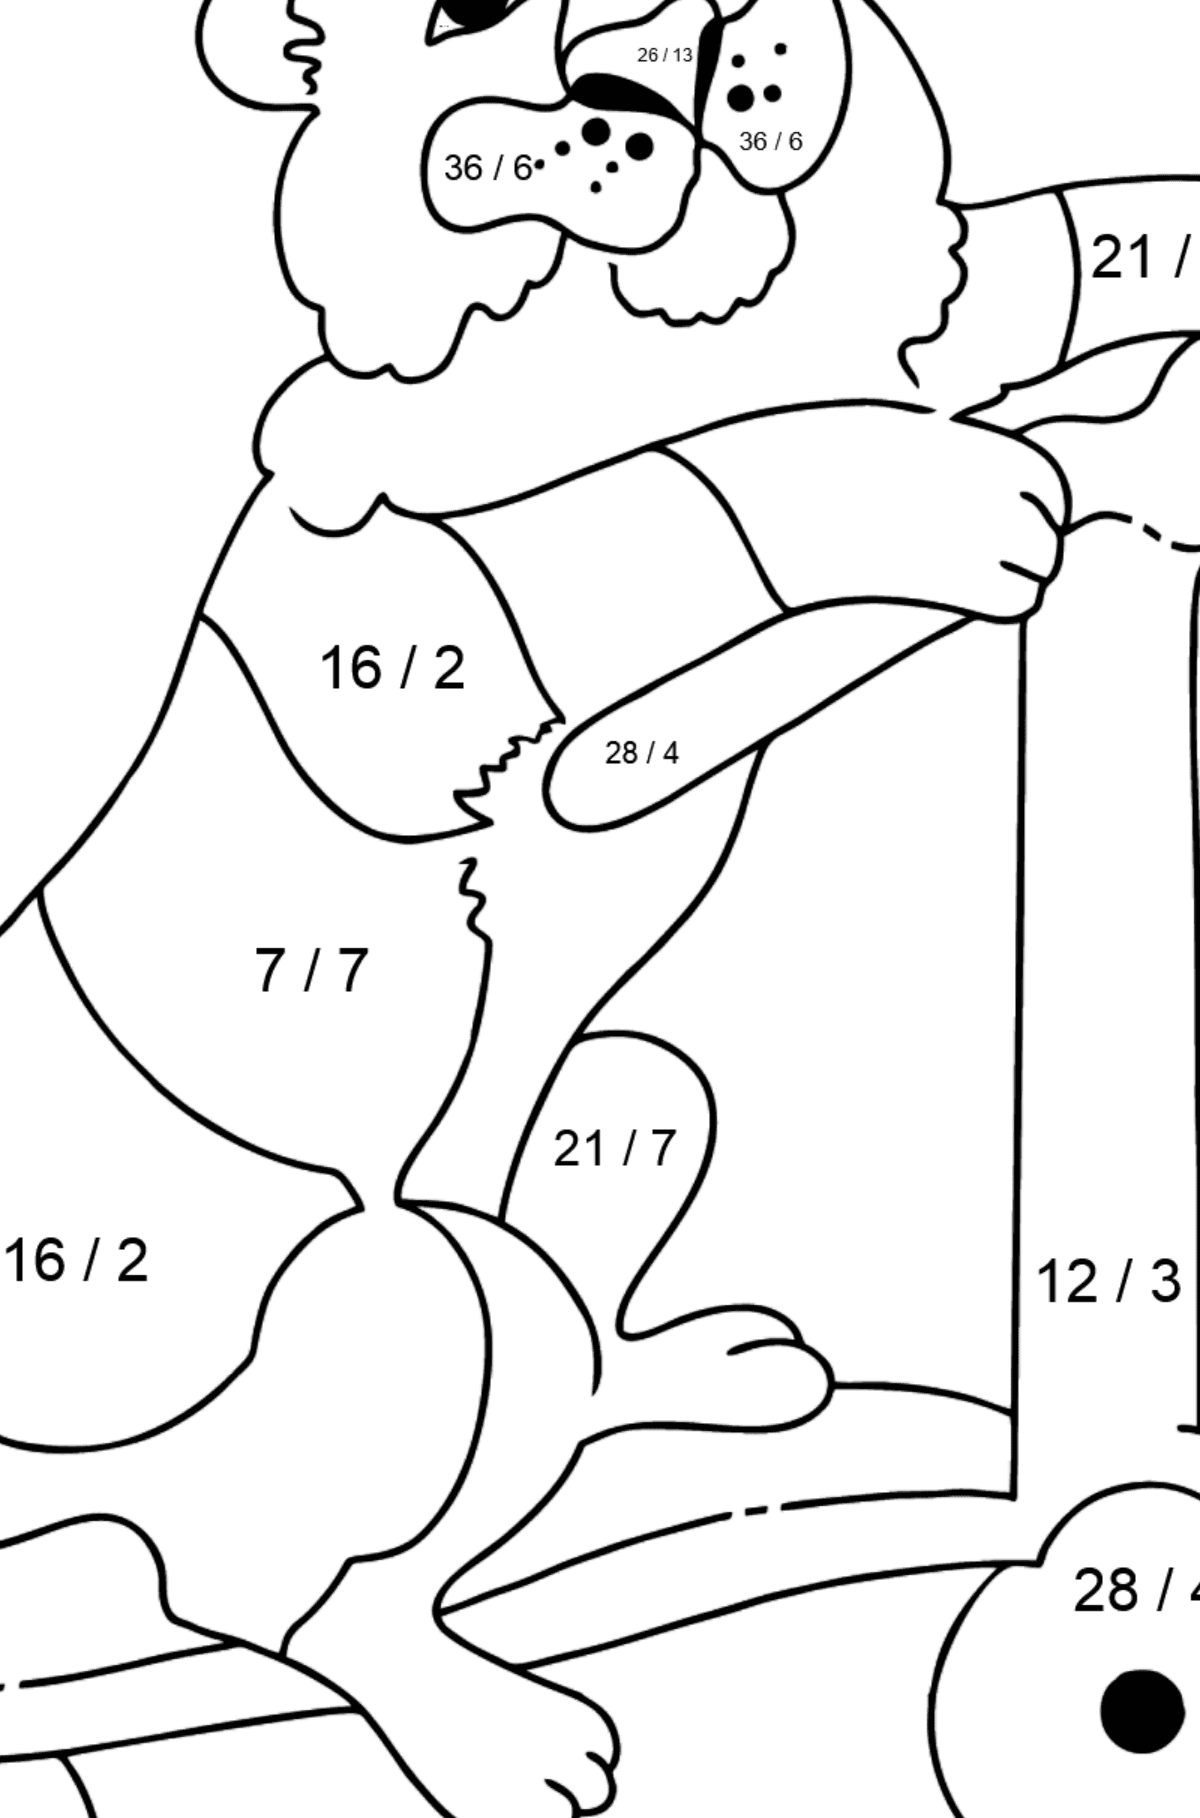 Coloring Page - A Tiger is Learning to Ride a Scooter - Math Coloring - Division for Kids